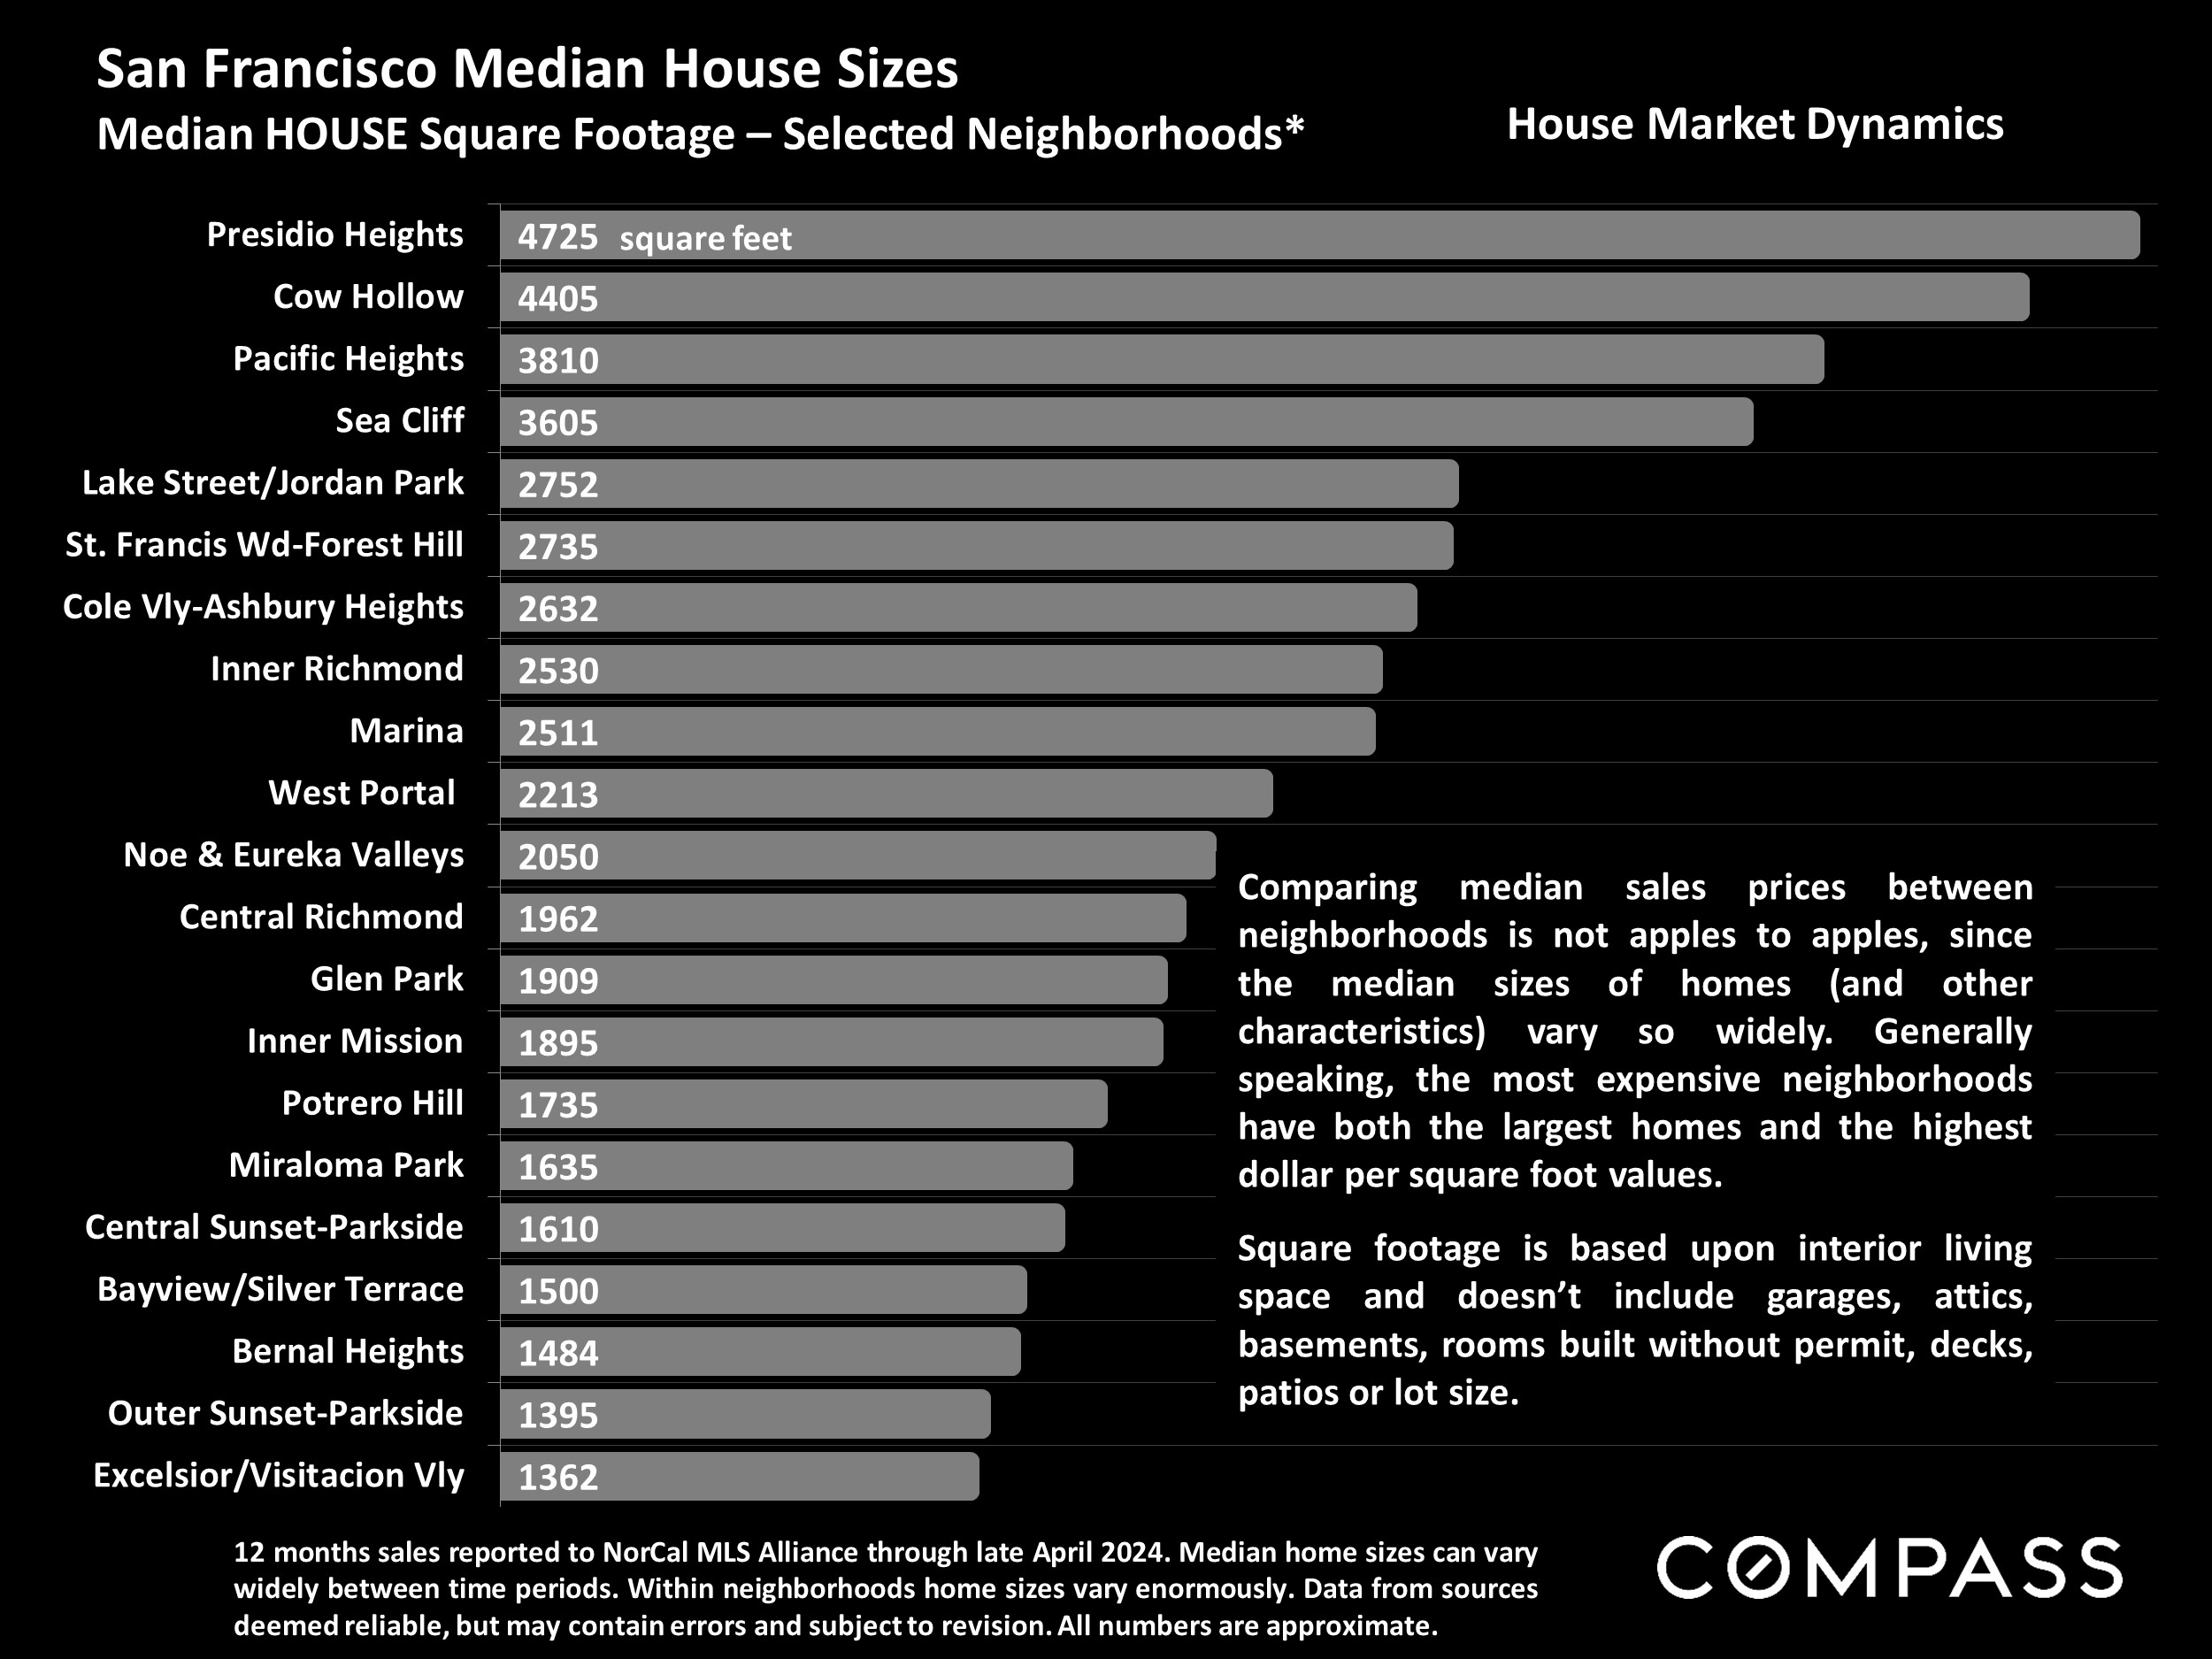 San Francisco Median House Sizes Median HOUSE Square Footage - Selected Neighborhoods*